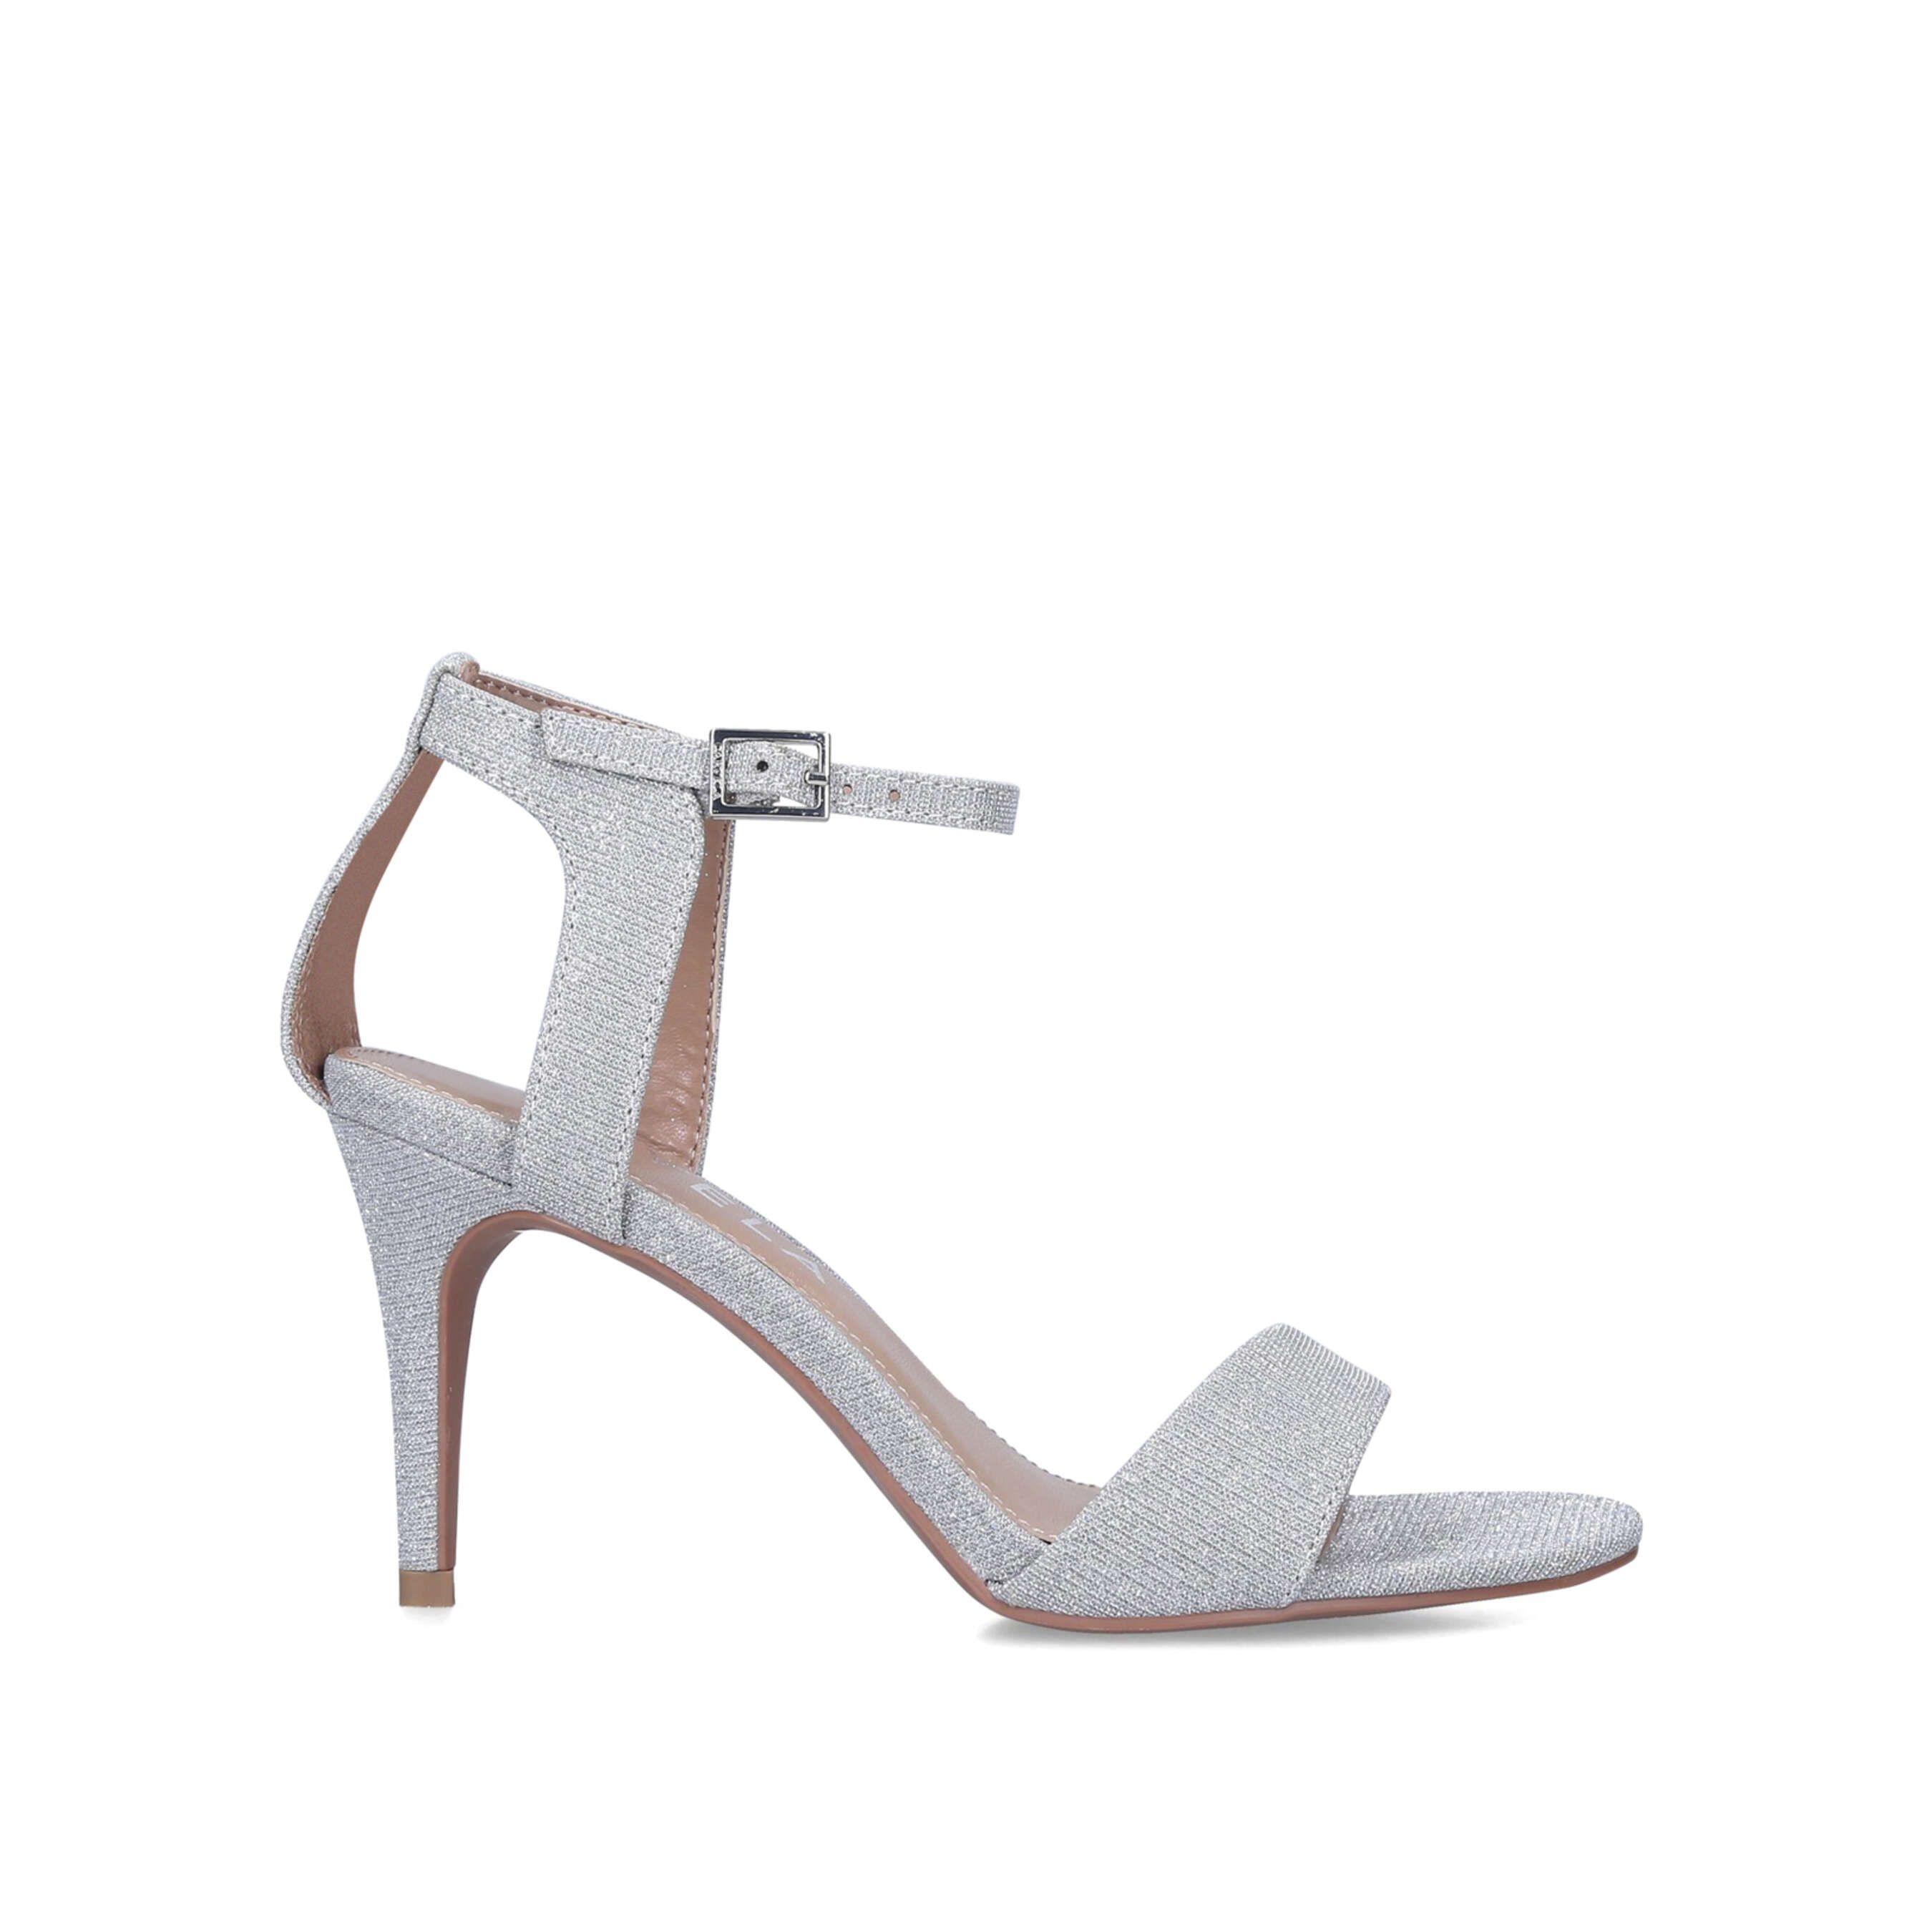 Woven with silver glitter, the Kolluding strappy heels feature a rounded toe and thin straps with buckle adjustability around the cut out ankle. The thin heel sits at a comfortable mid height 85mm.